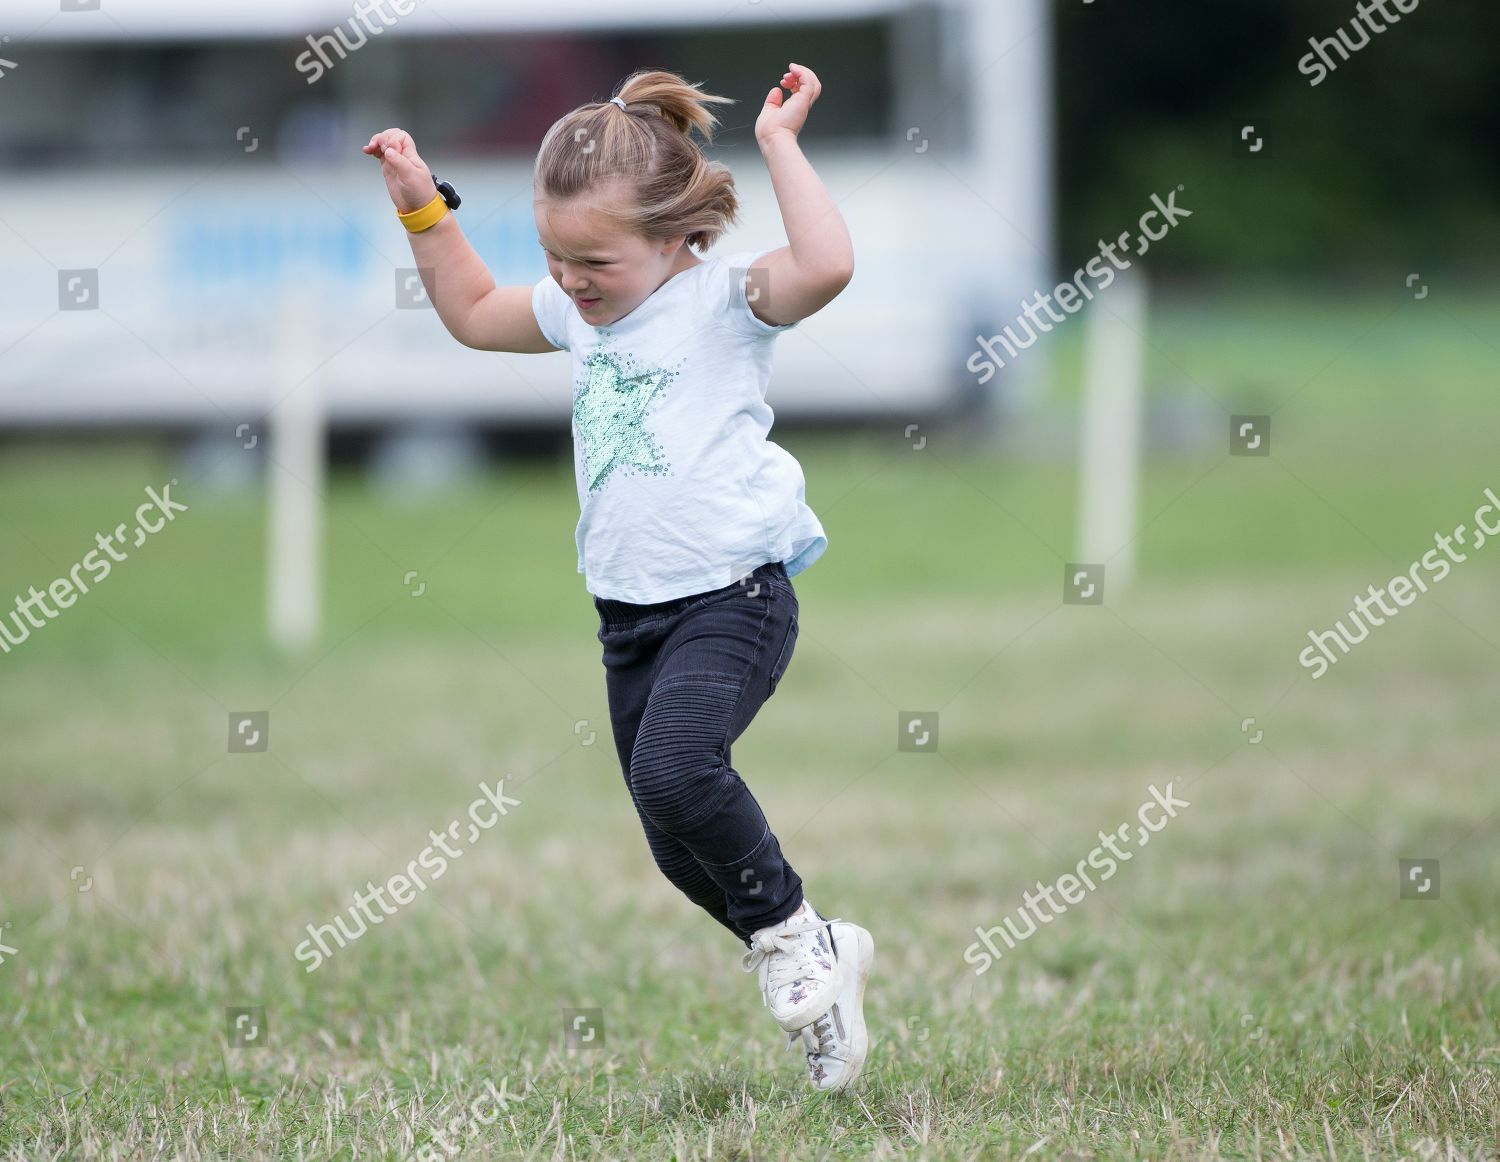 whately-manor-international-horse-trials-at-gatcombe-park-gloucestershire-uk-shutterstock-editorial-9877693r.jpg